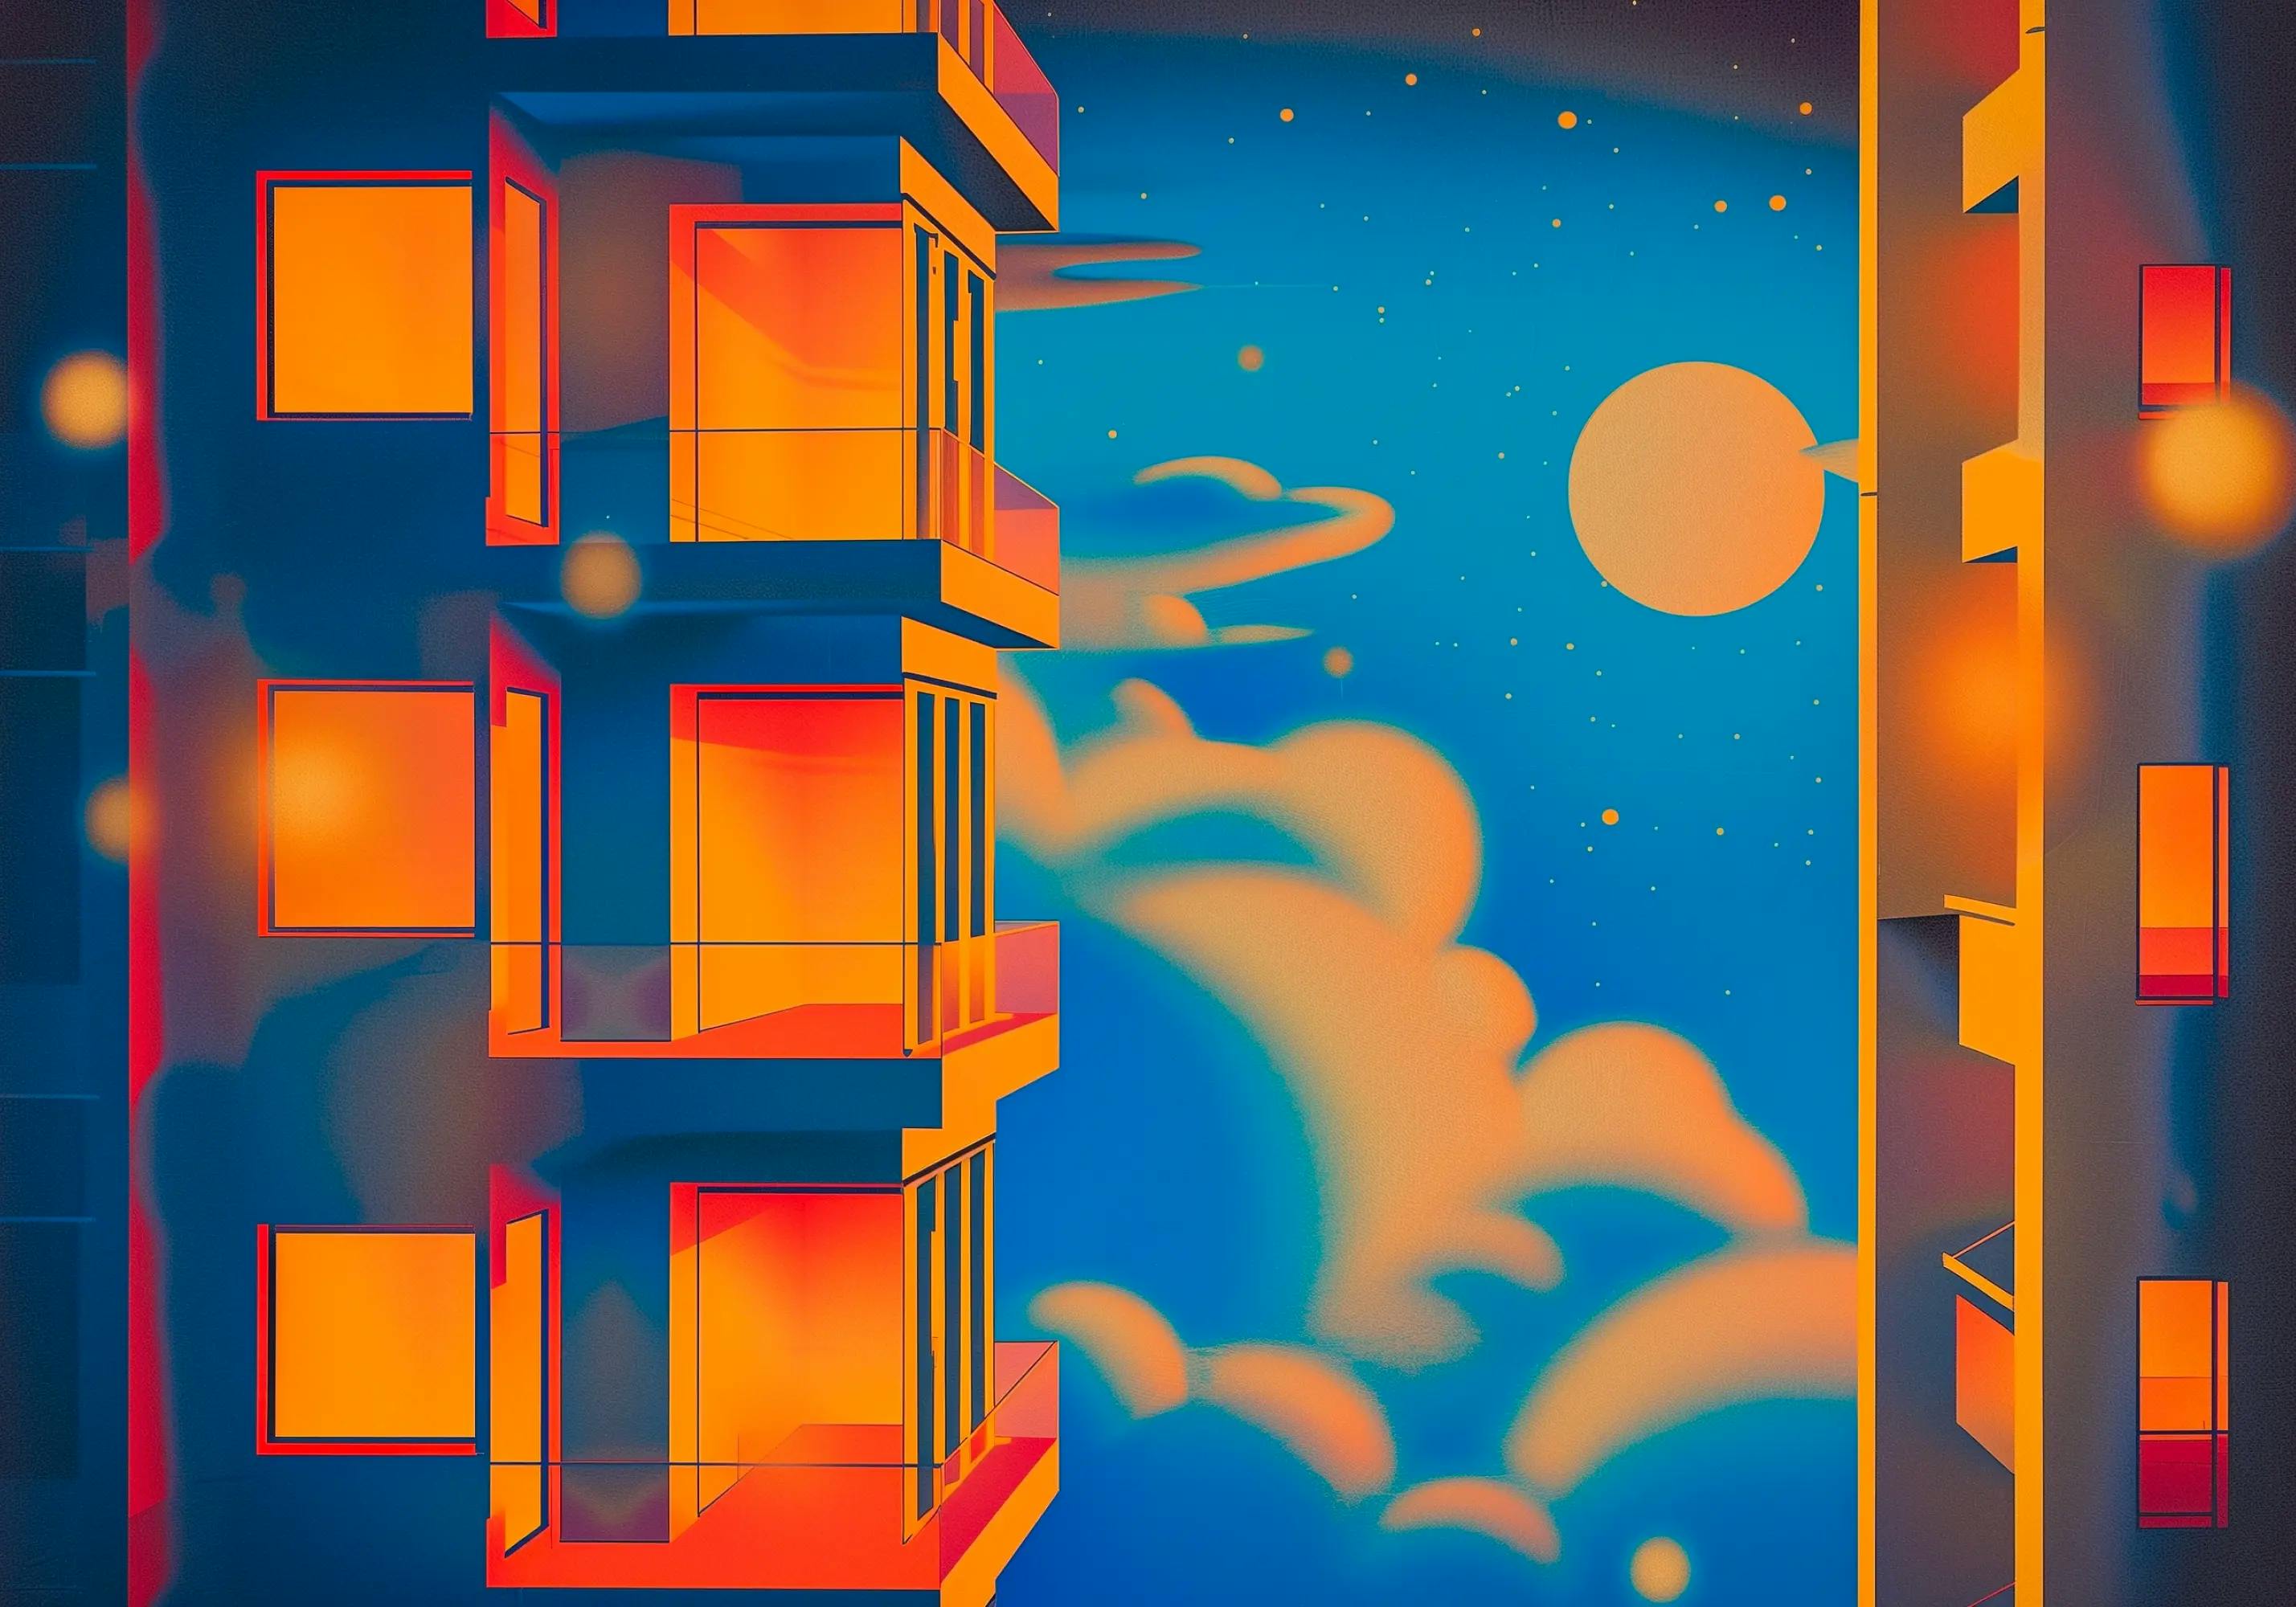 Illustration of apartment buildings against a nighttime sky